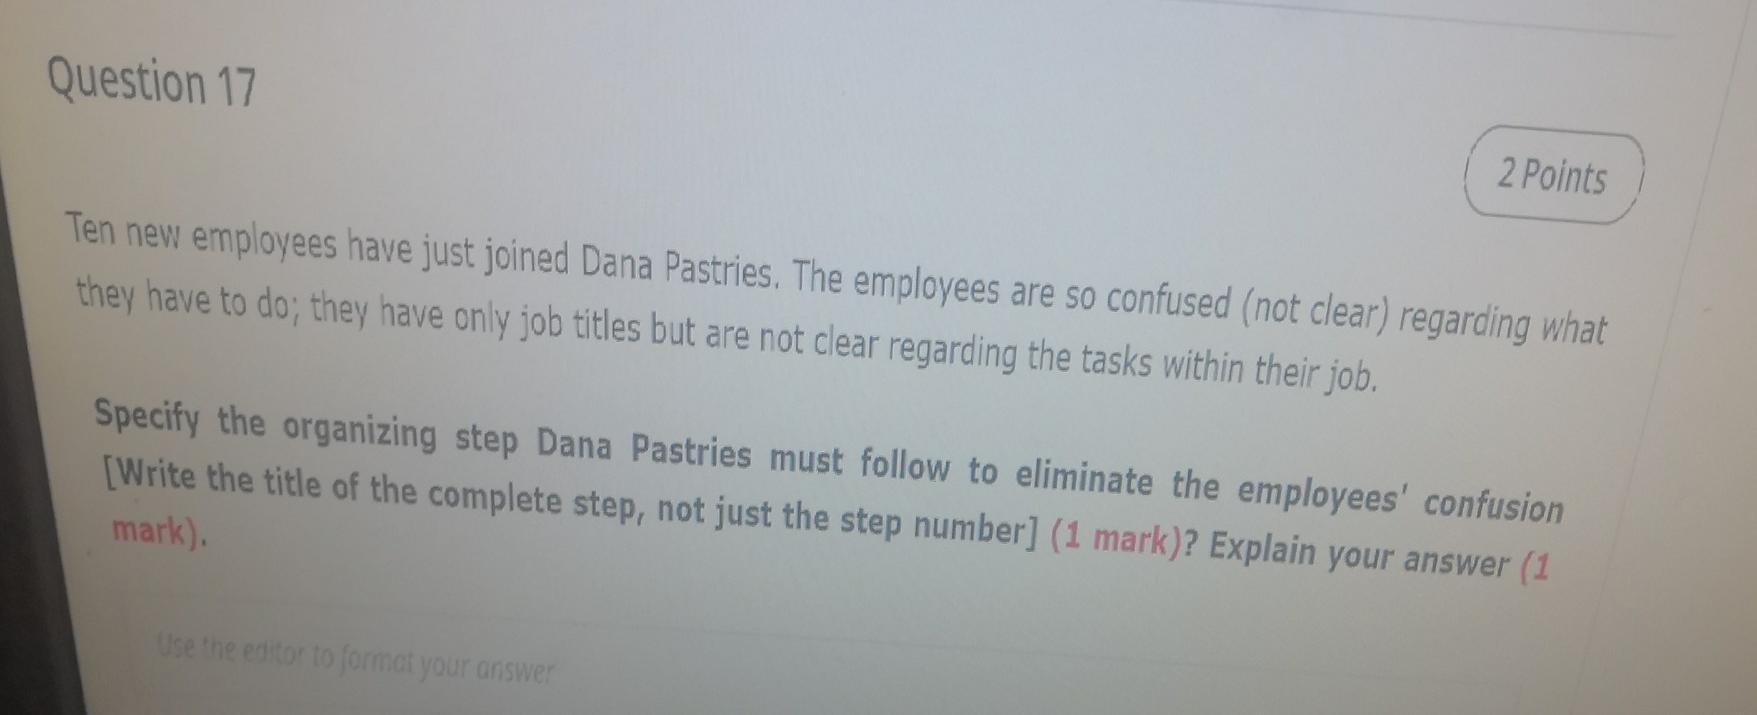 Question 17
2 Points
Ten new employees have just joined Dana Pastries. The employees are so confused (not clear) regarding wh